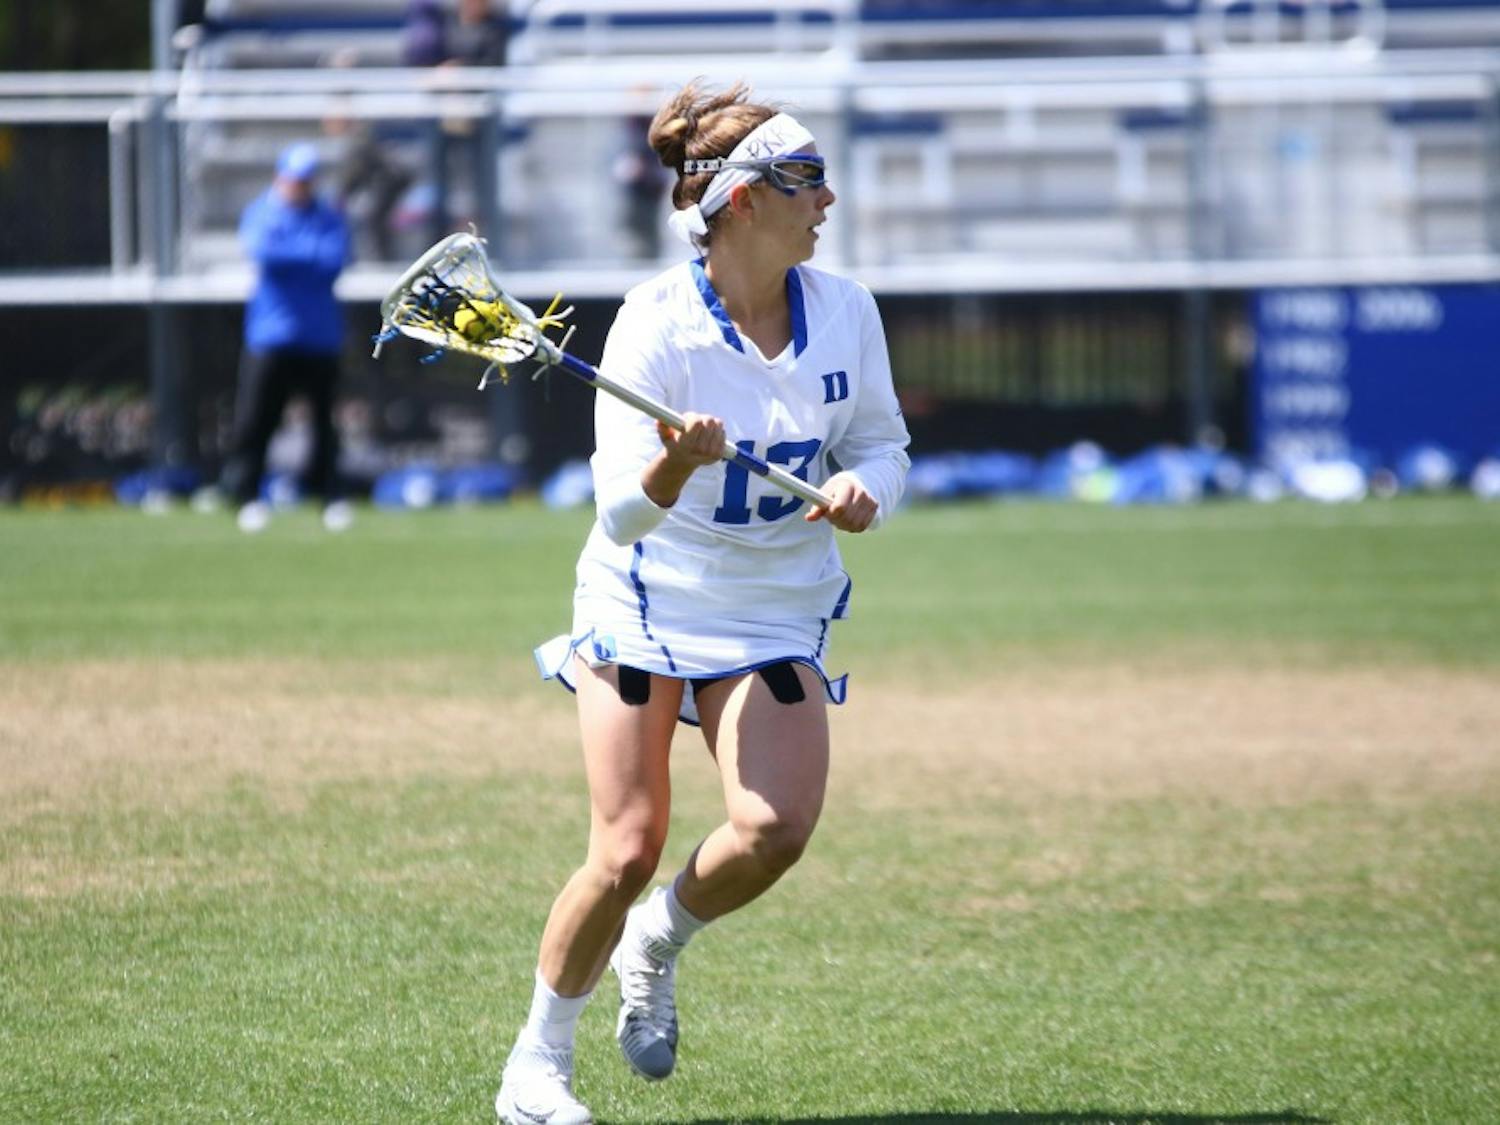 The Blue Devils had trouble scoring in the second half, managing just three goals as the Fighting Irish came from behind to tie the game and ultimately win in overtime.